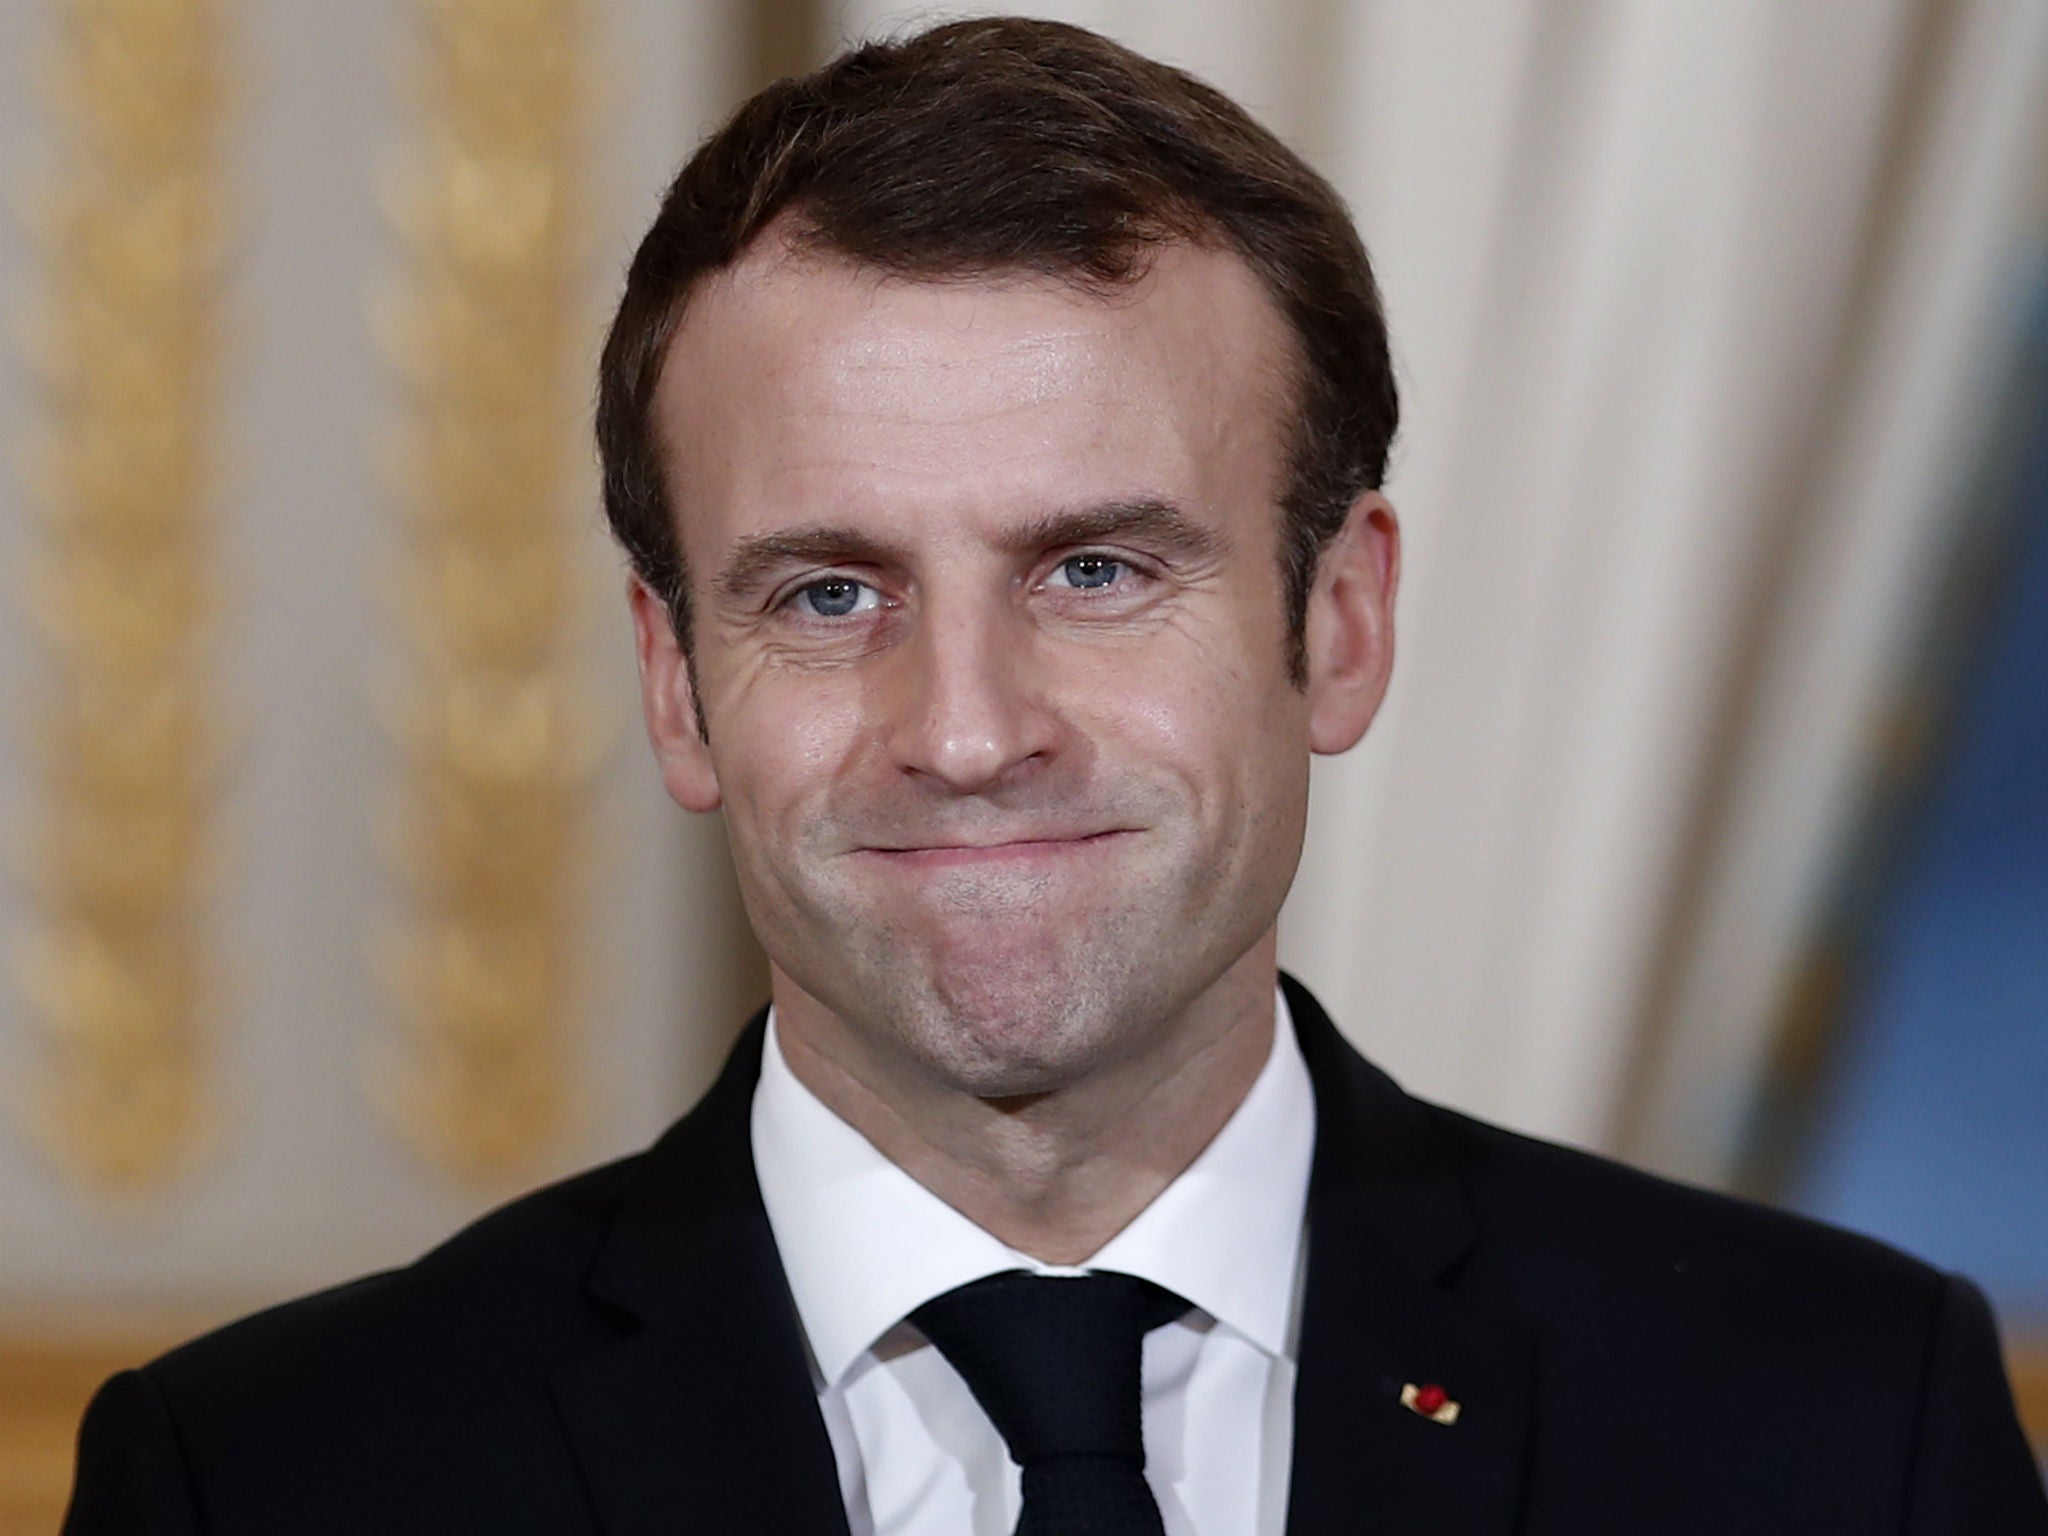 Emmanuel Macron has been called a ‘terrible president’ among other names by the Italians